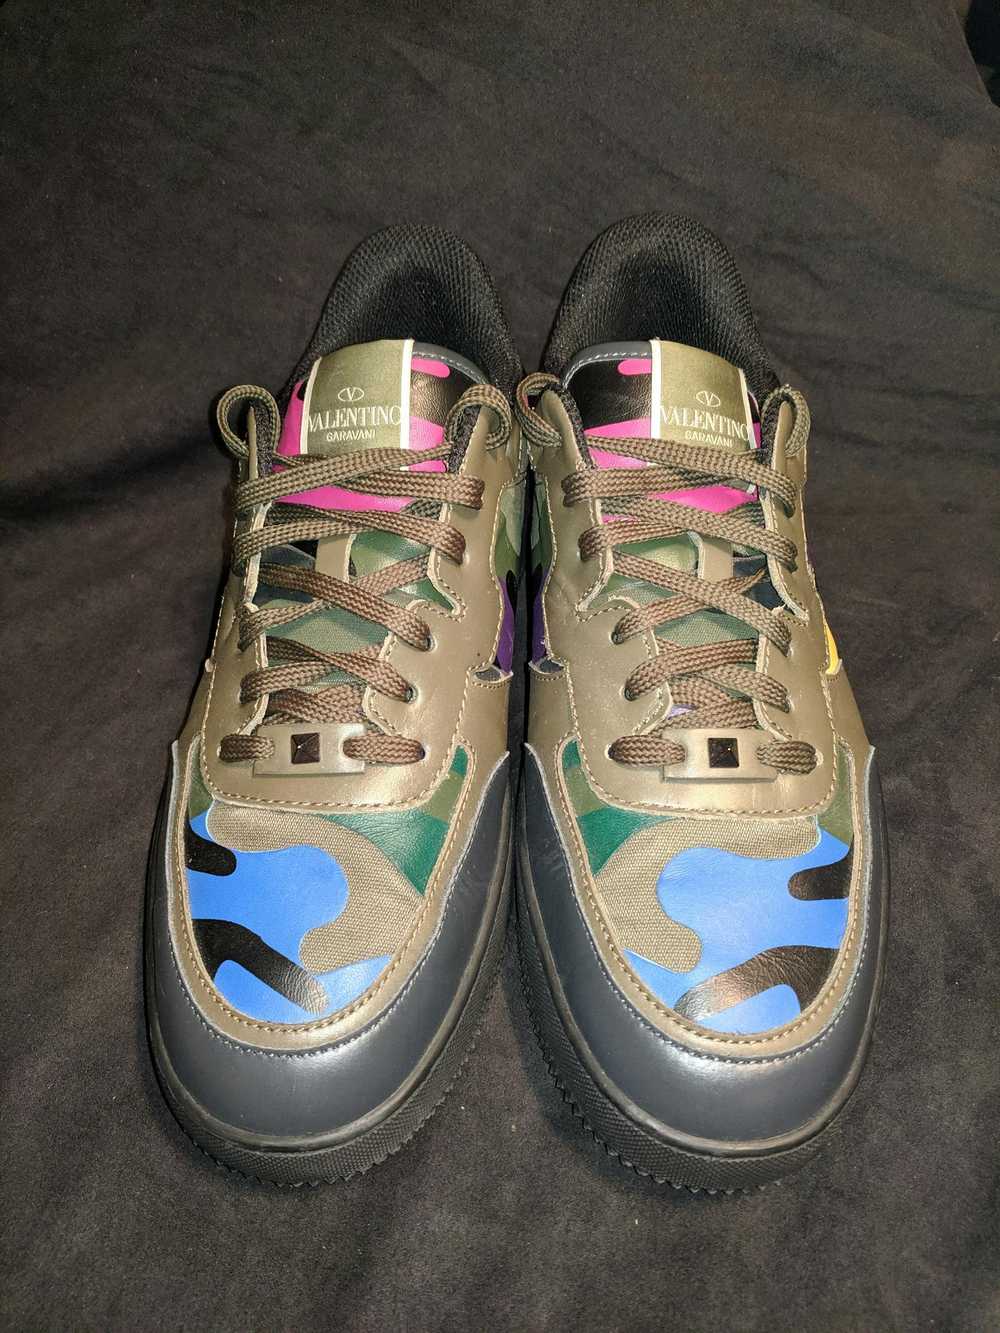 Valentino ROCK BE SNEAKERS - image 6